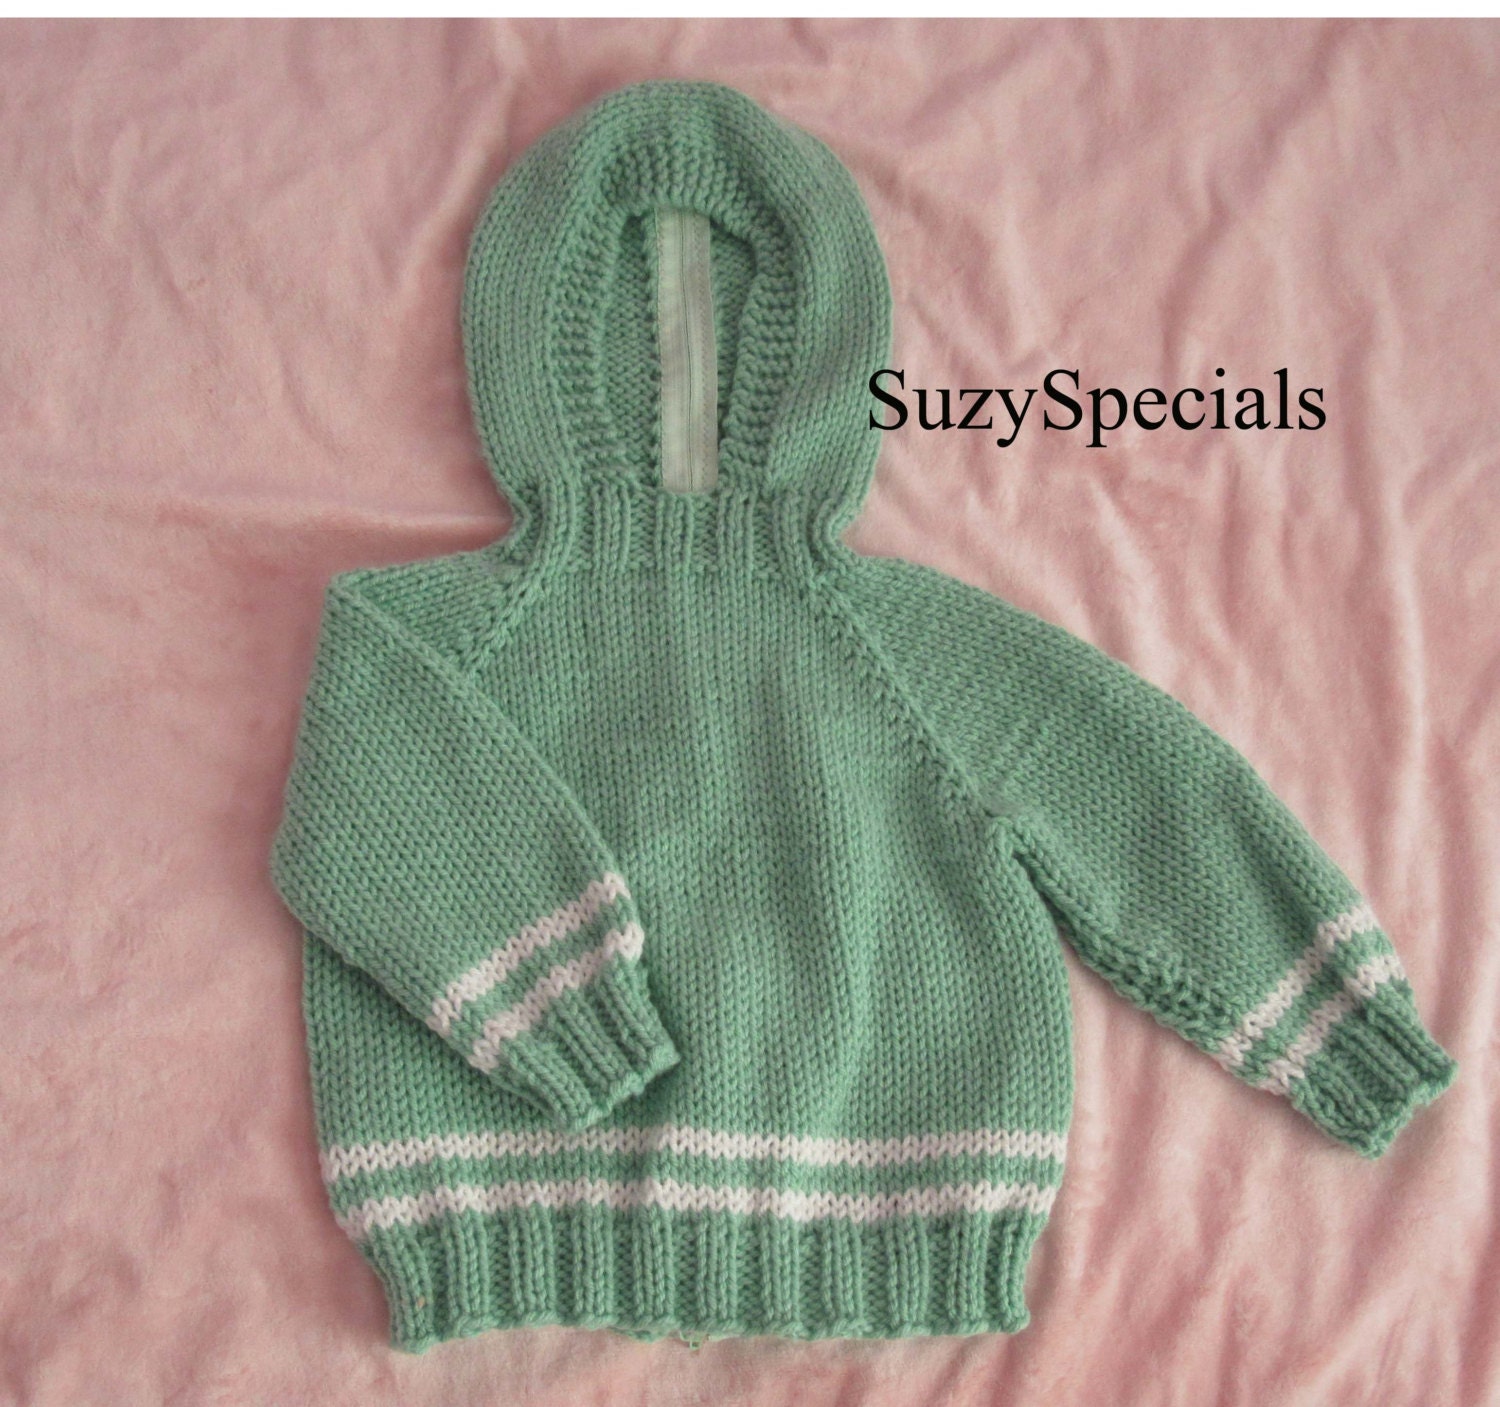 Hooded Knitted Baby Sweater in with back zipper in pale green